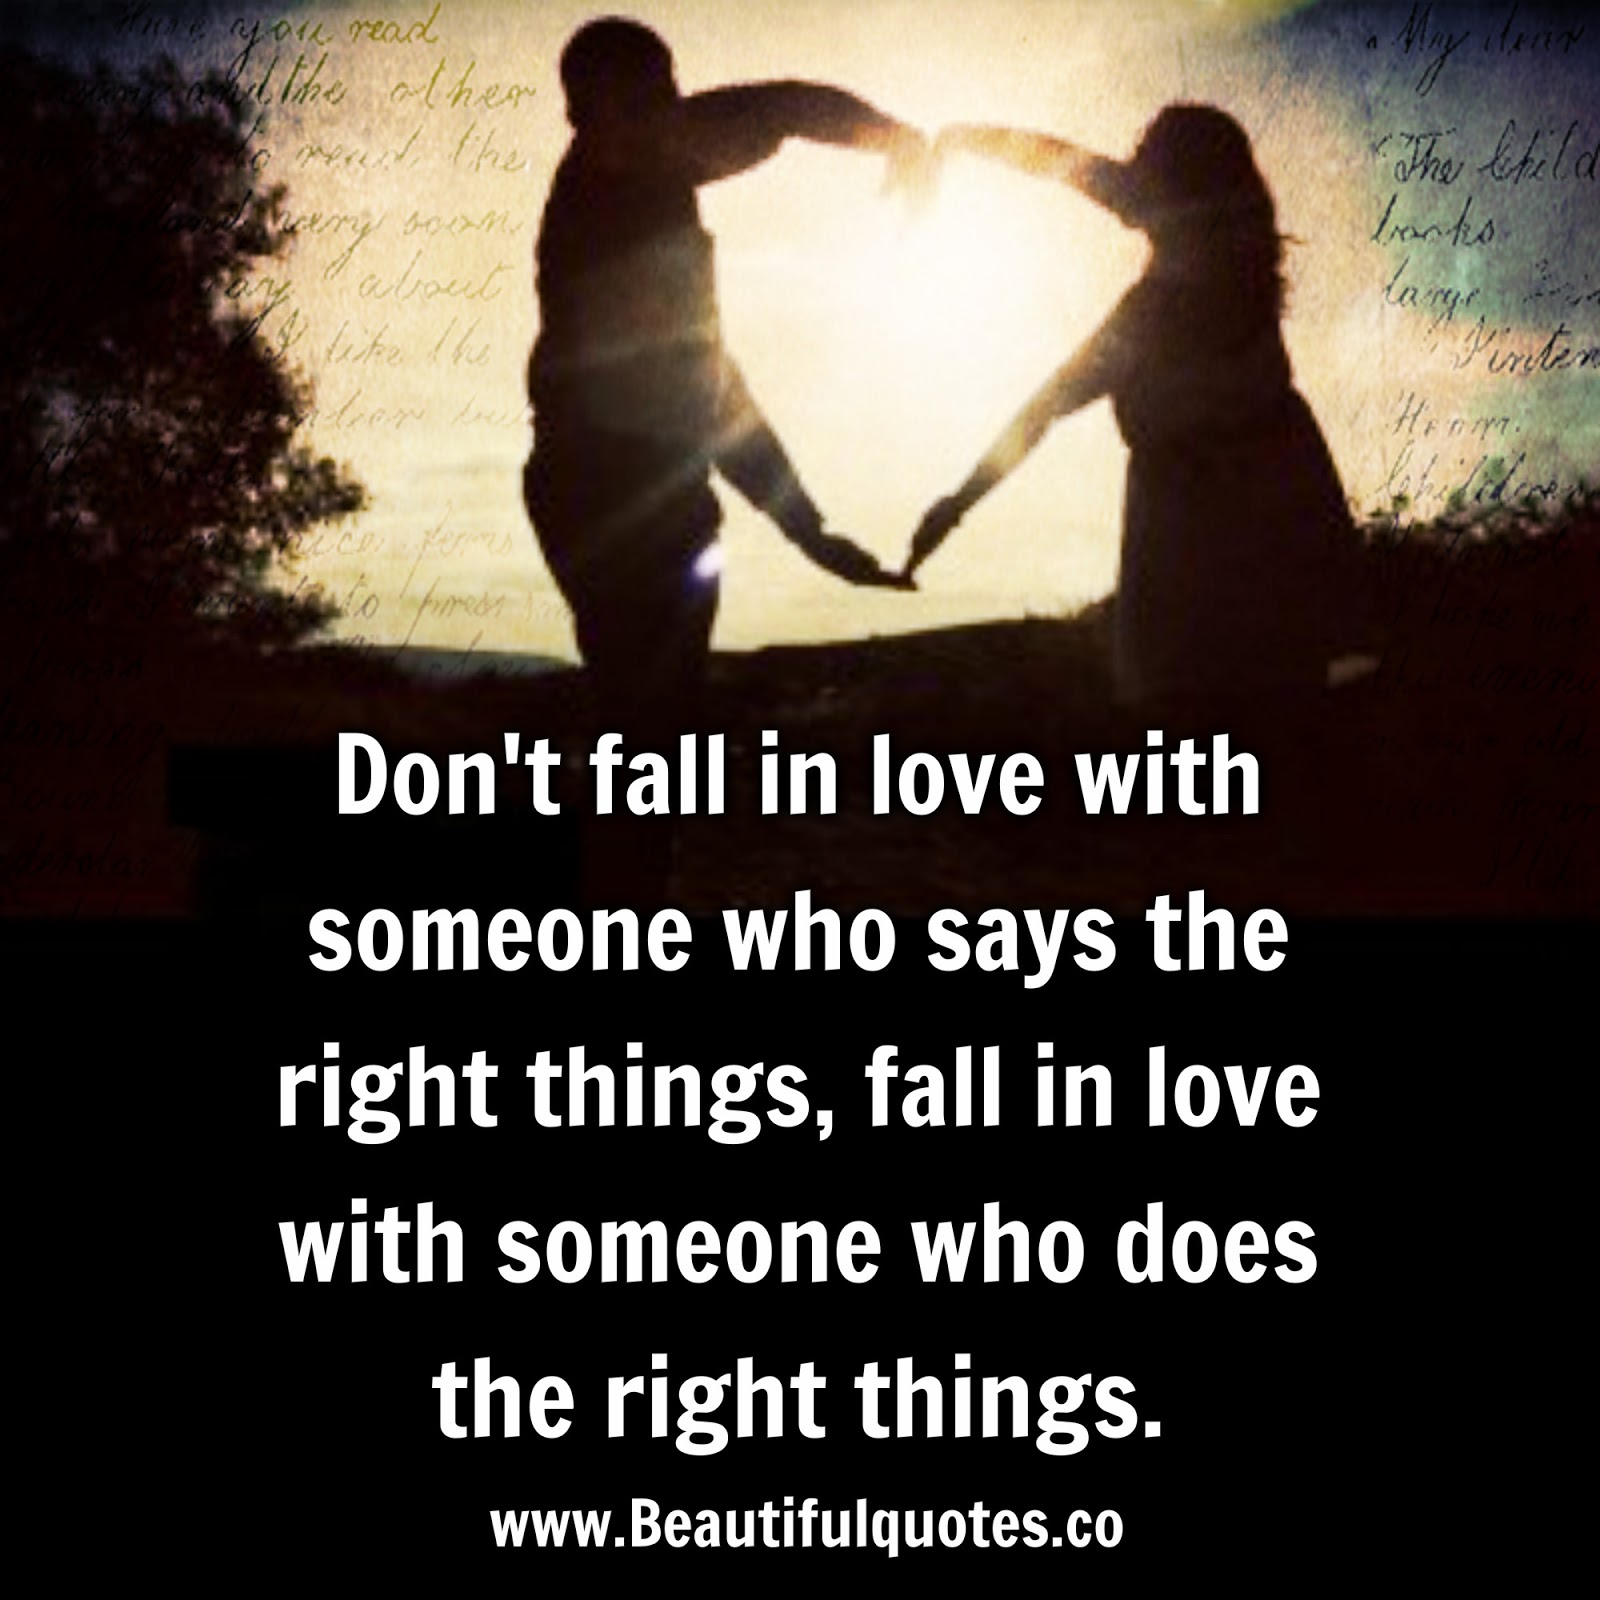 15 Strong Love Quotes for the One You Love | Thousands of Inspiration ...